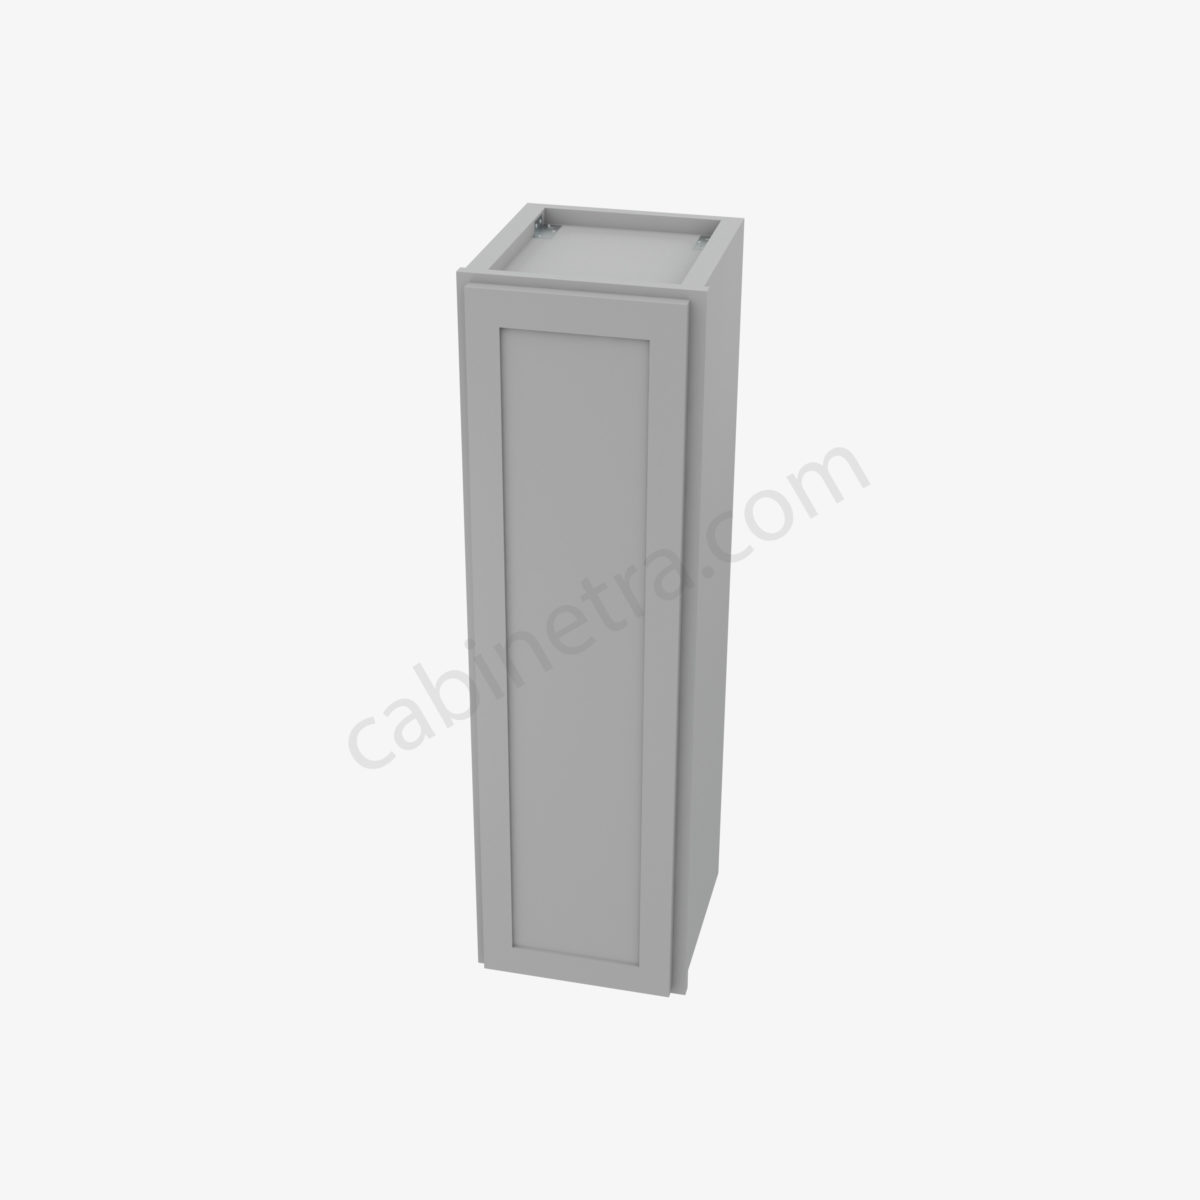 AB W1242 3 Forevermark Lait Gray Shaker Cabinetra scaled